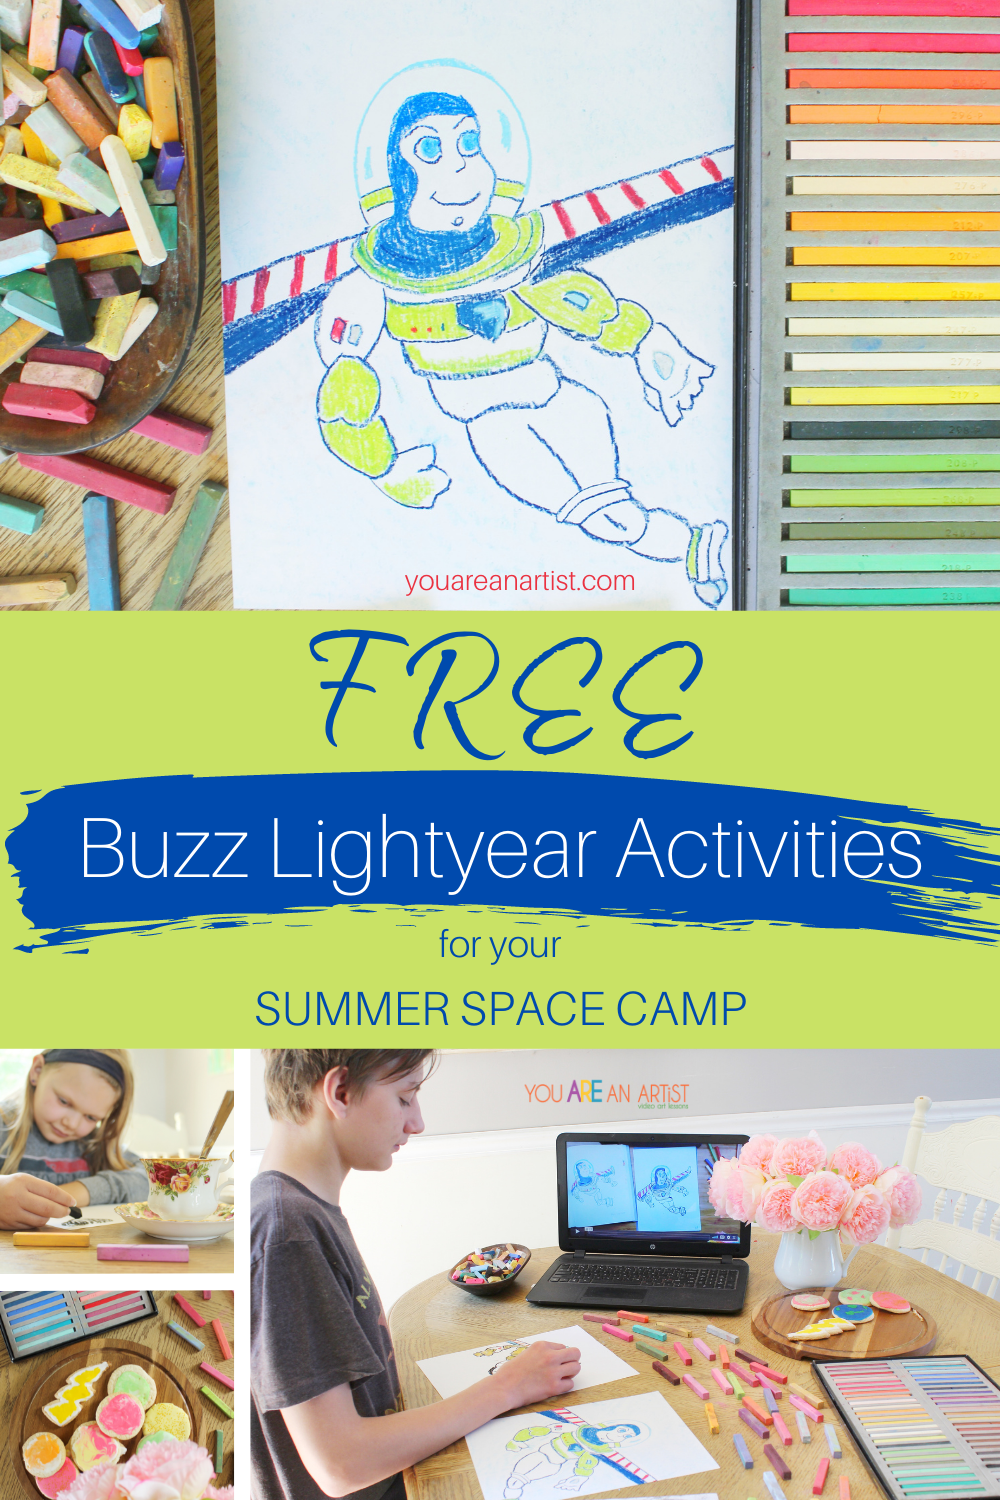 Free Buzz Lightyear Activities For Your Summer Space Camp: To infinity and beyond with these Free Buzz Lightyear activities perfect for your summer space camp! #spacecamp #artcamp #spaceartcamp #summercamp #summerartcamp #BuzzLightyear #YouAREAnArtist #videoartlessons